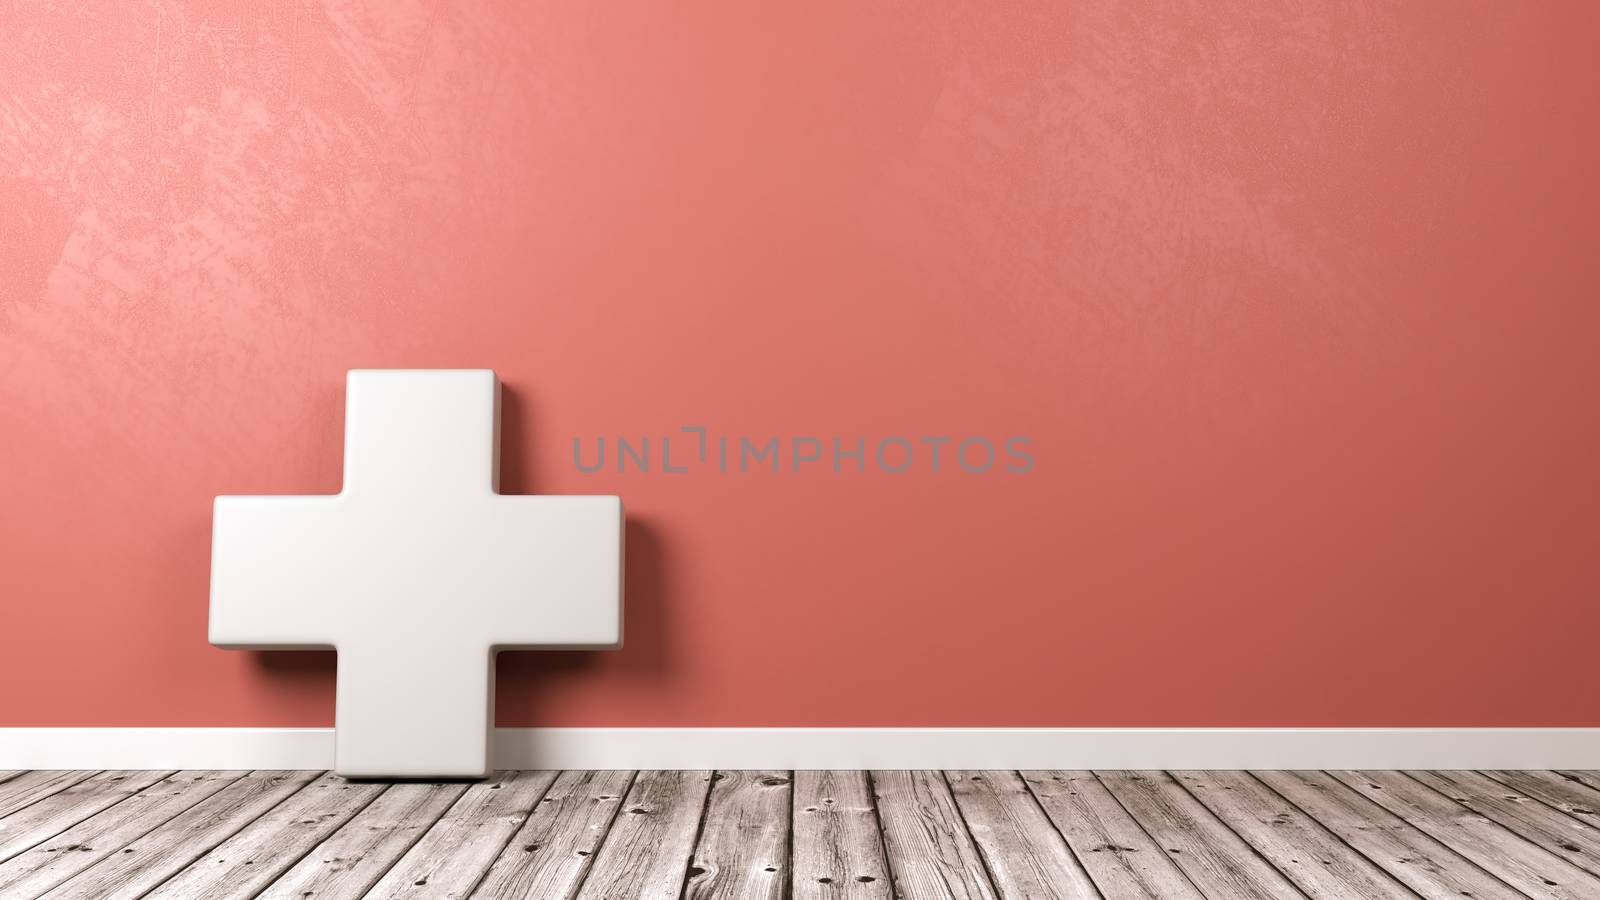 White Cross Medical Symbol Shape on Wooden Floor Against Red Wall with Copyspace 3D Illustration